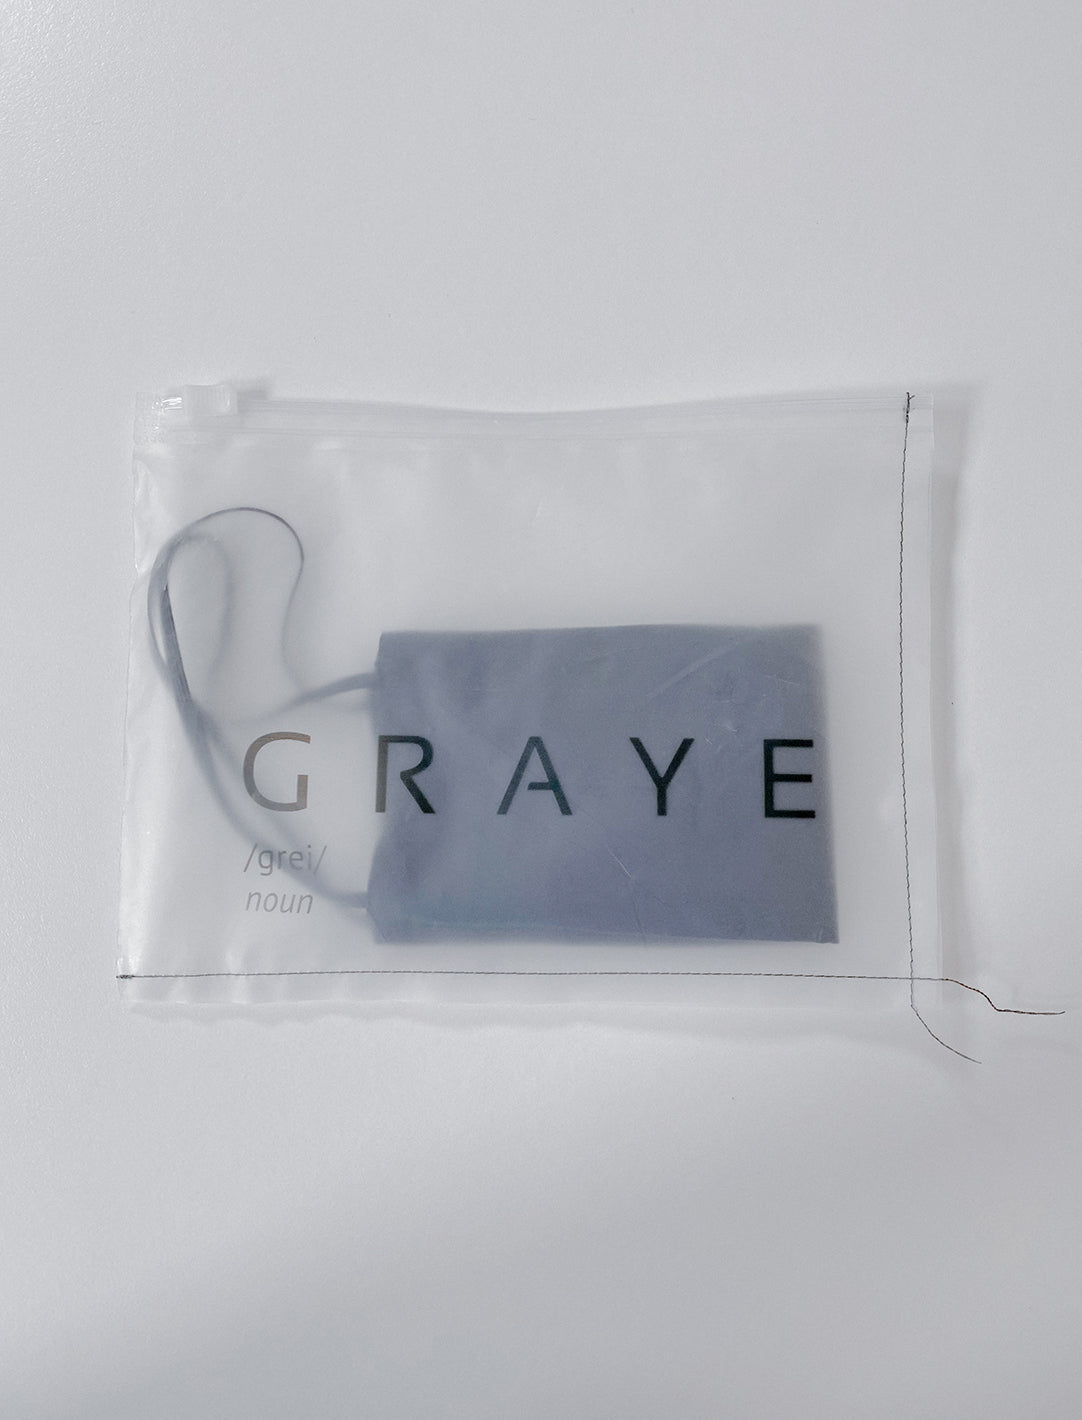 UPCYCLING PACKAGING: MASK PROTECTIVE SLEEVE - G R A Y E